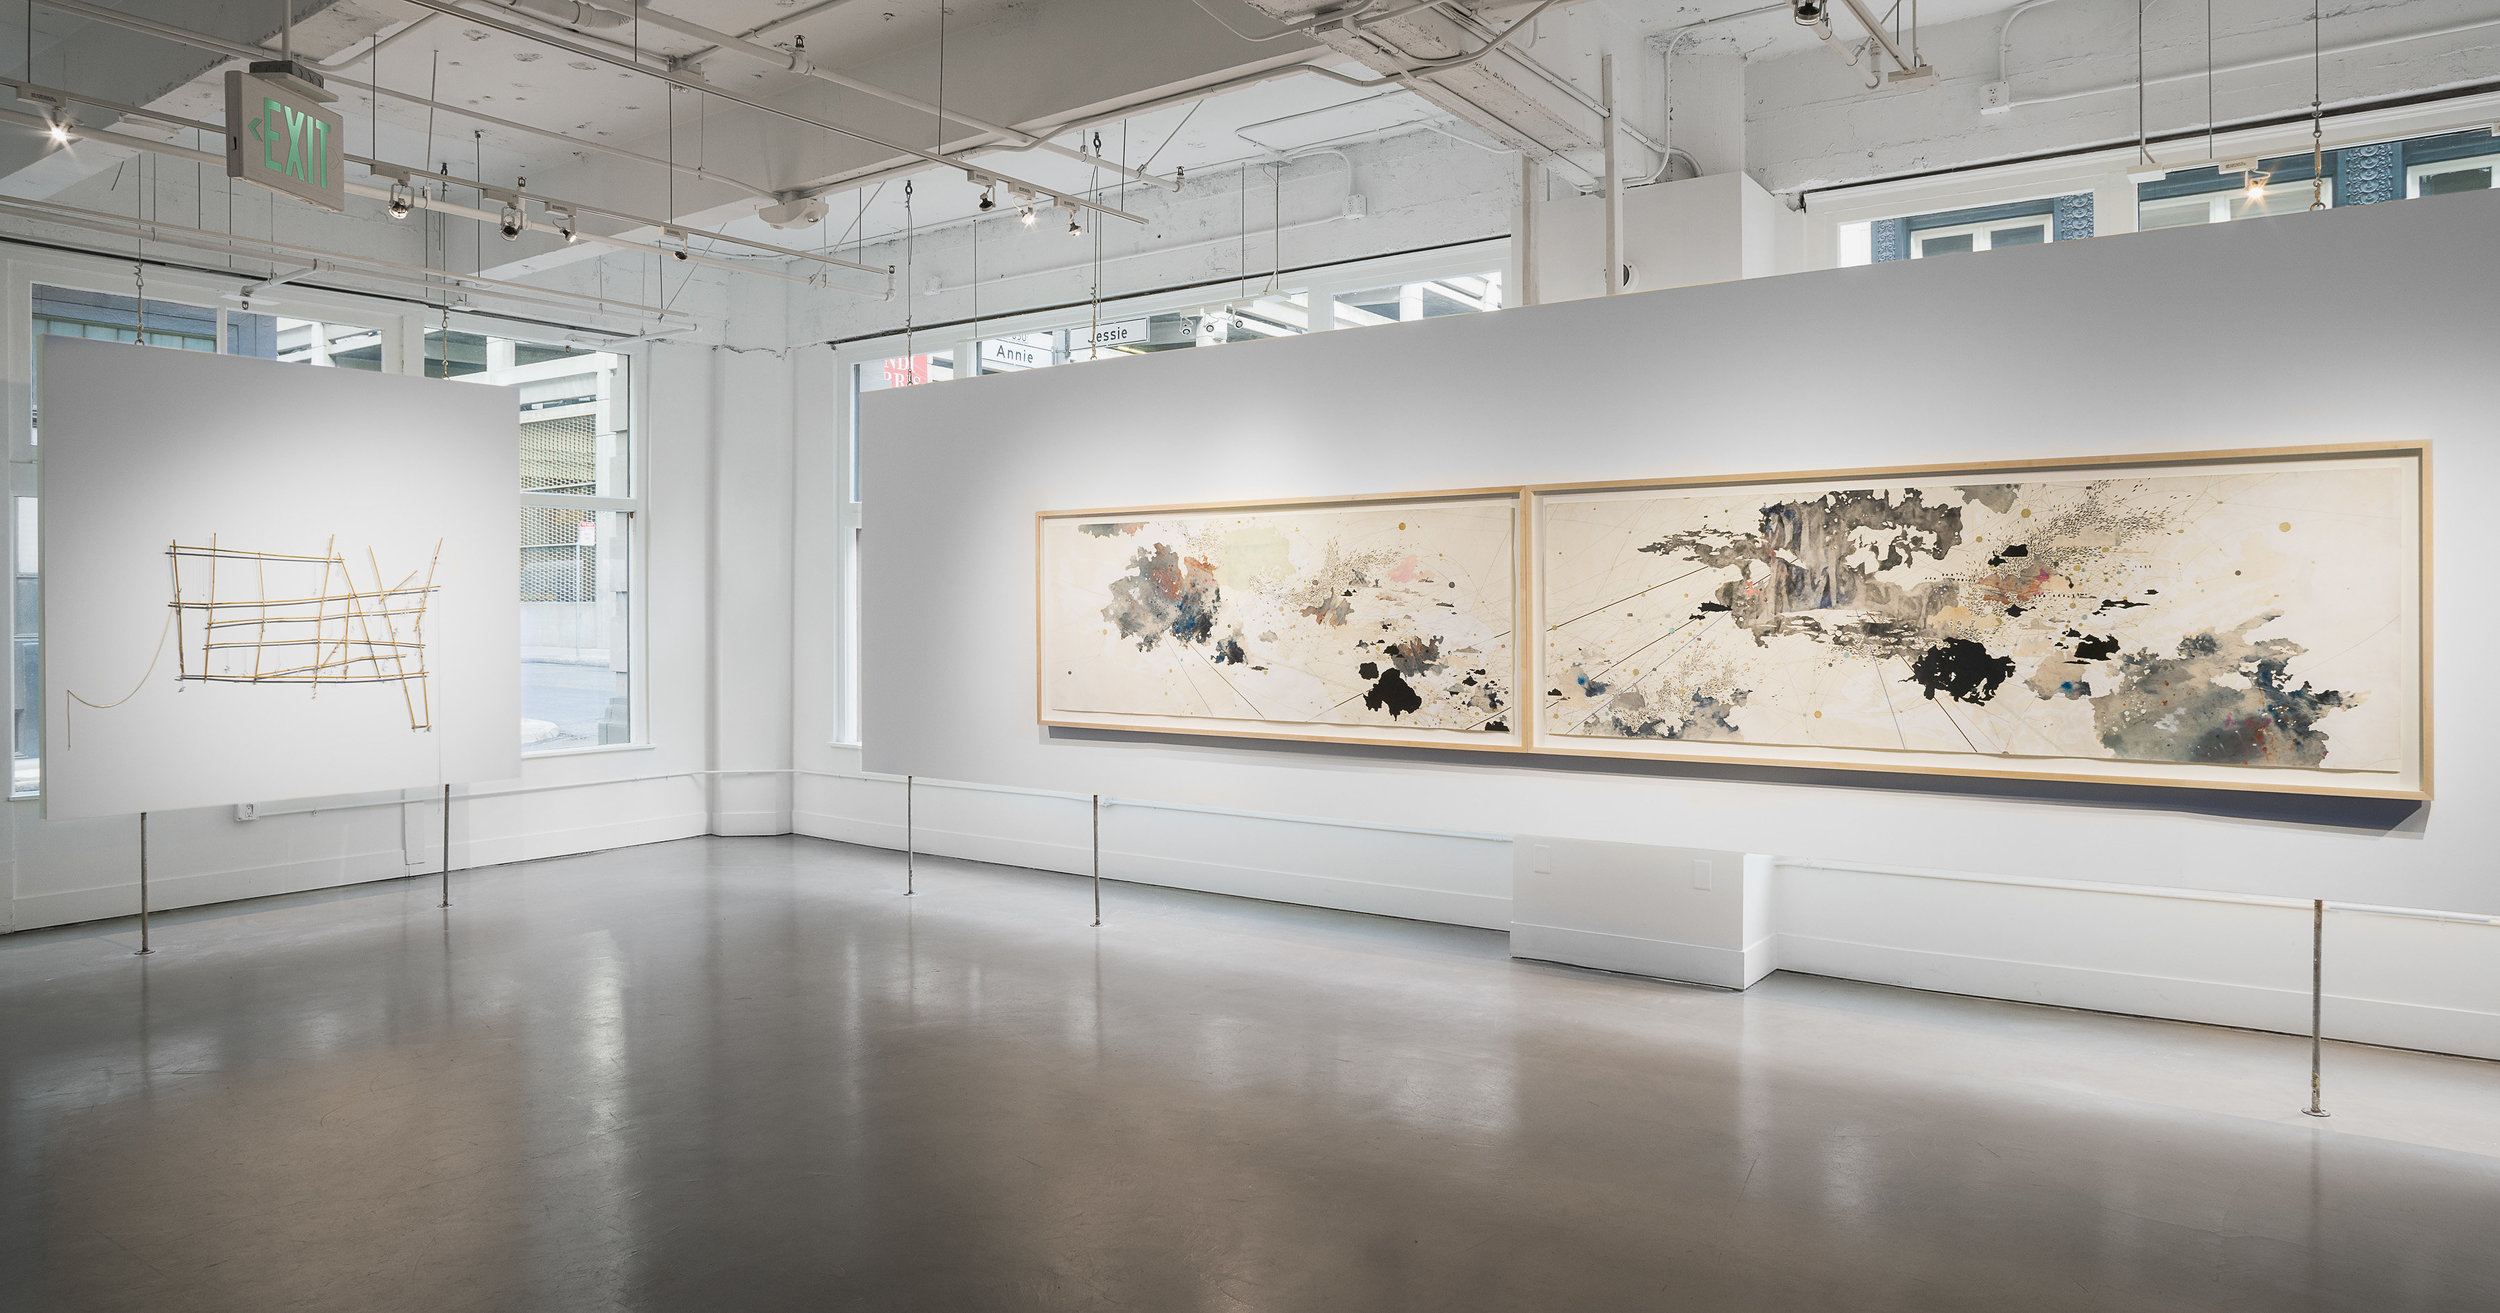   Seeking Civilization: Art and Cartography,  installation view, Gallery Wendi Norris, March 23 - May 13, 2017, photography: Hewitt Photography 